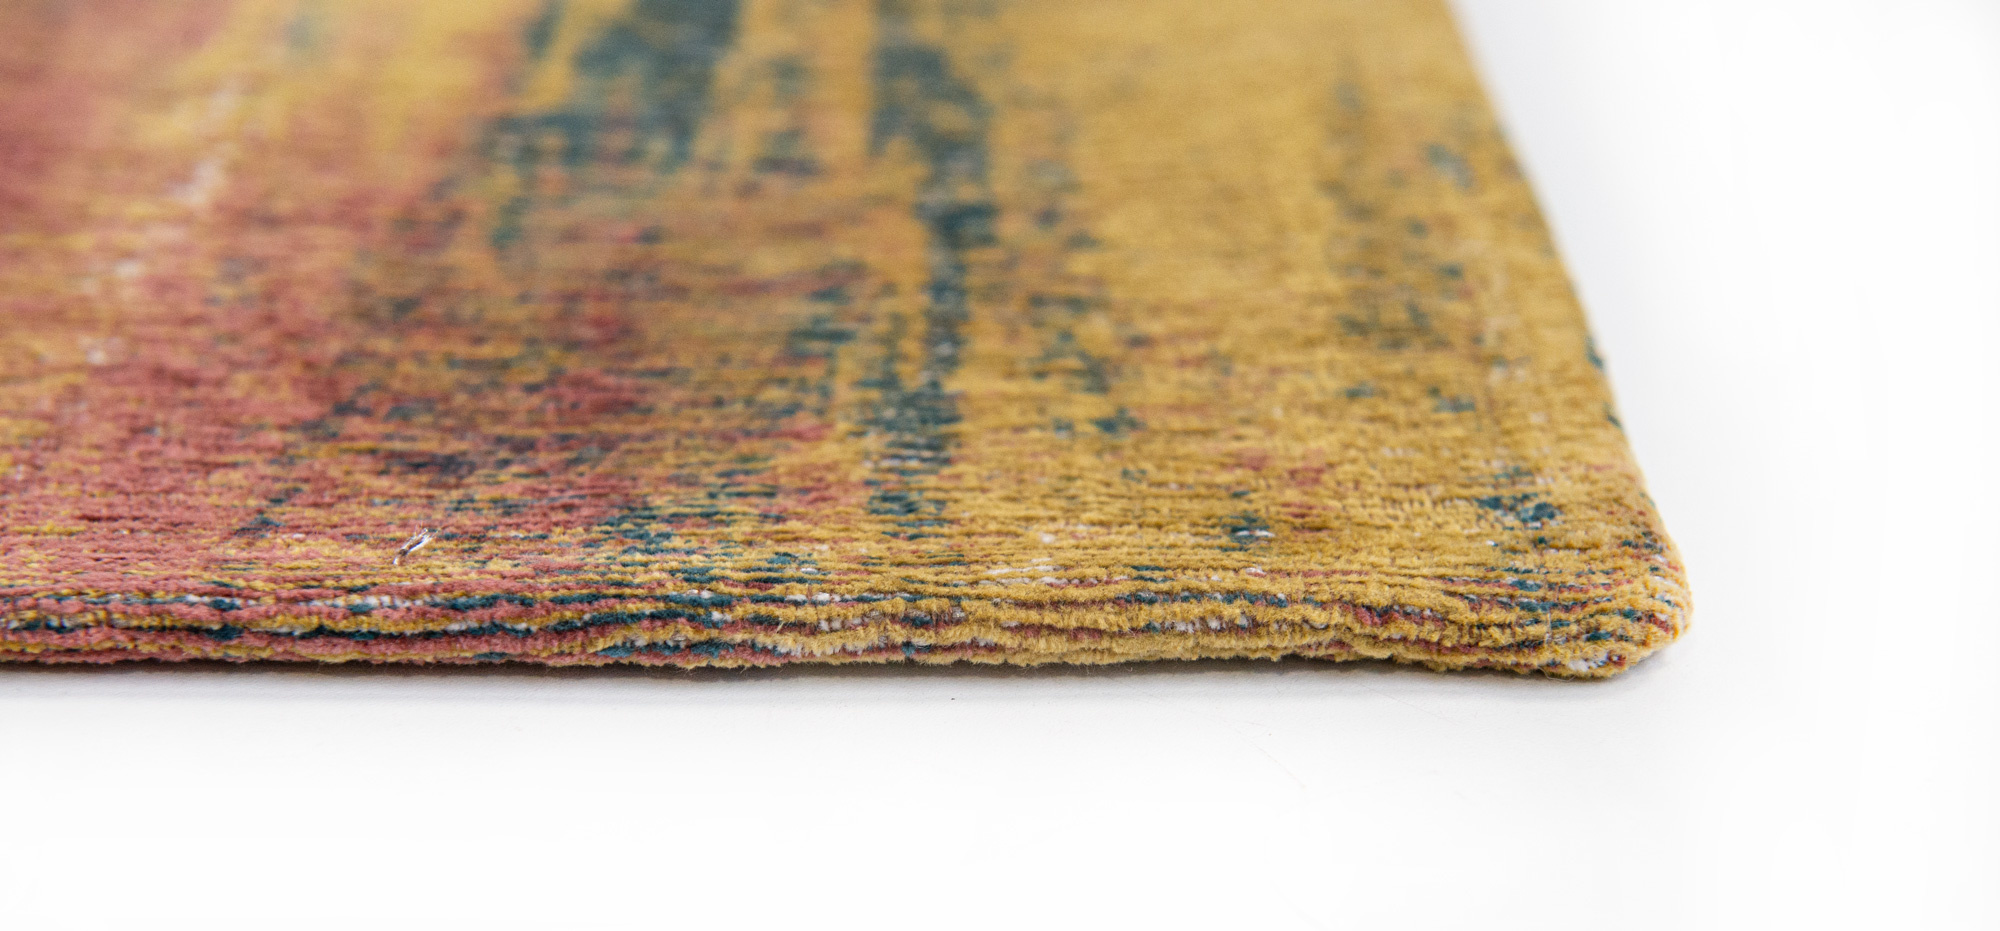 Abstract Flatwoven Mix Rug ☞ Size: 6' 7" x 9' 2" (200 x 280 cm)